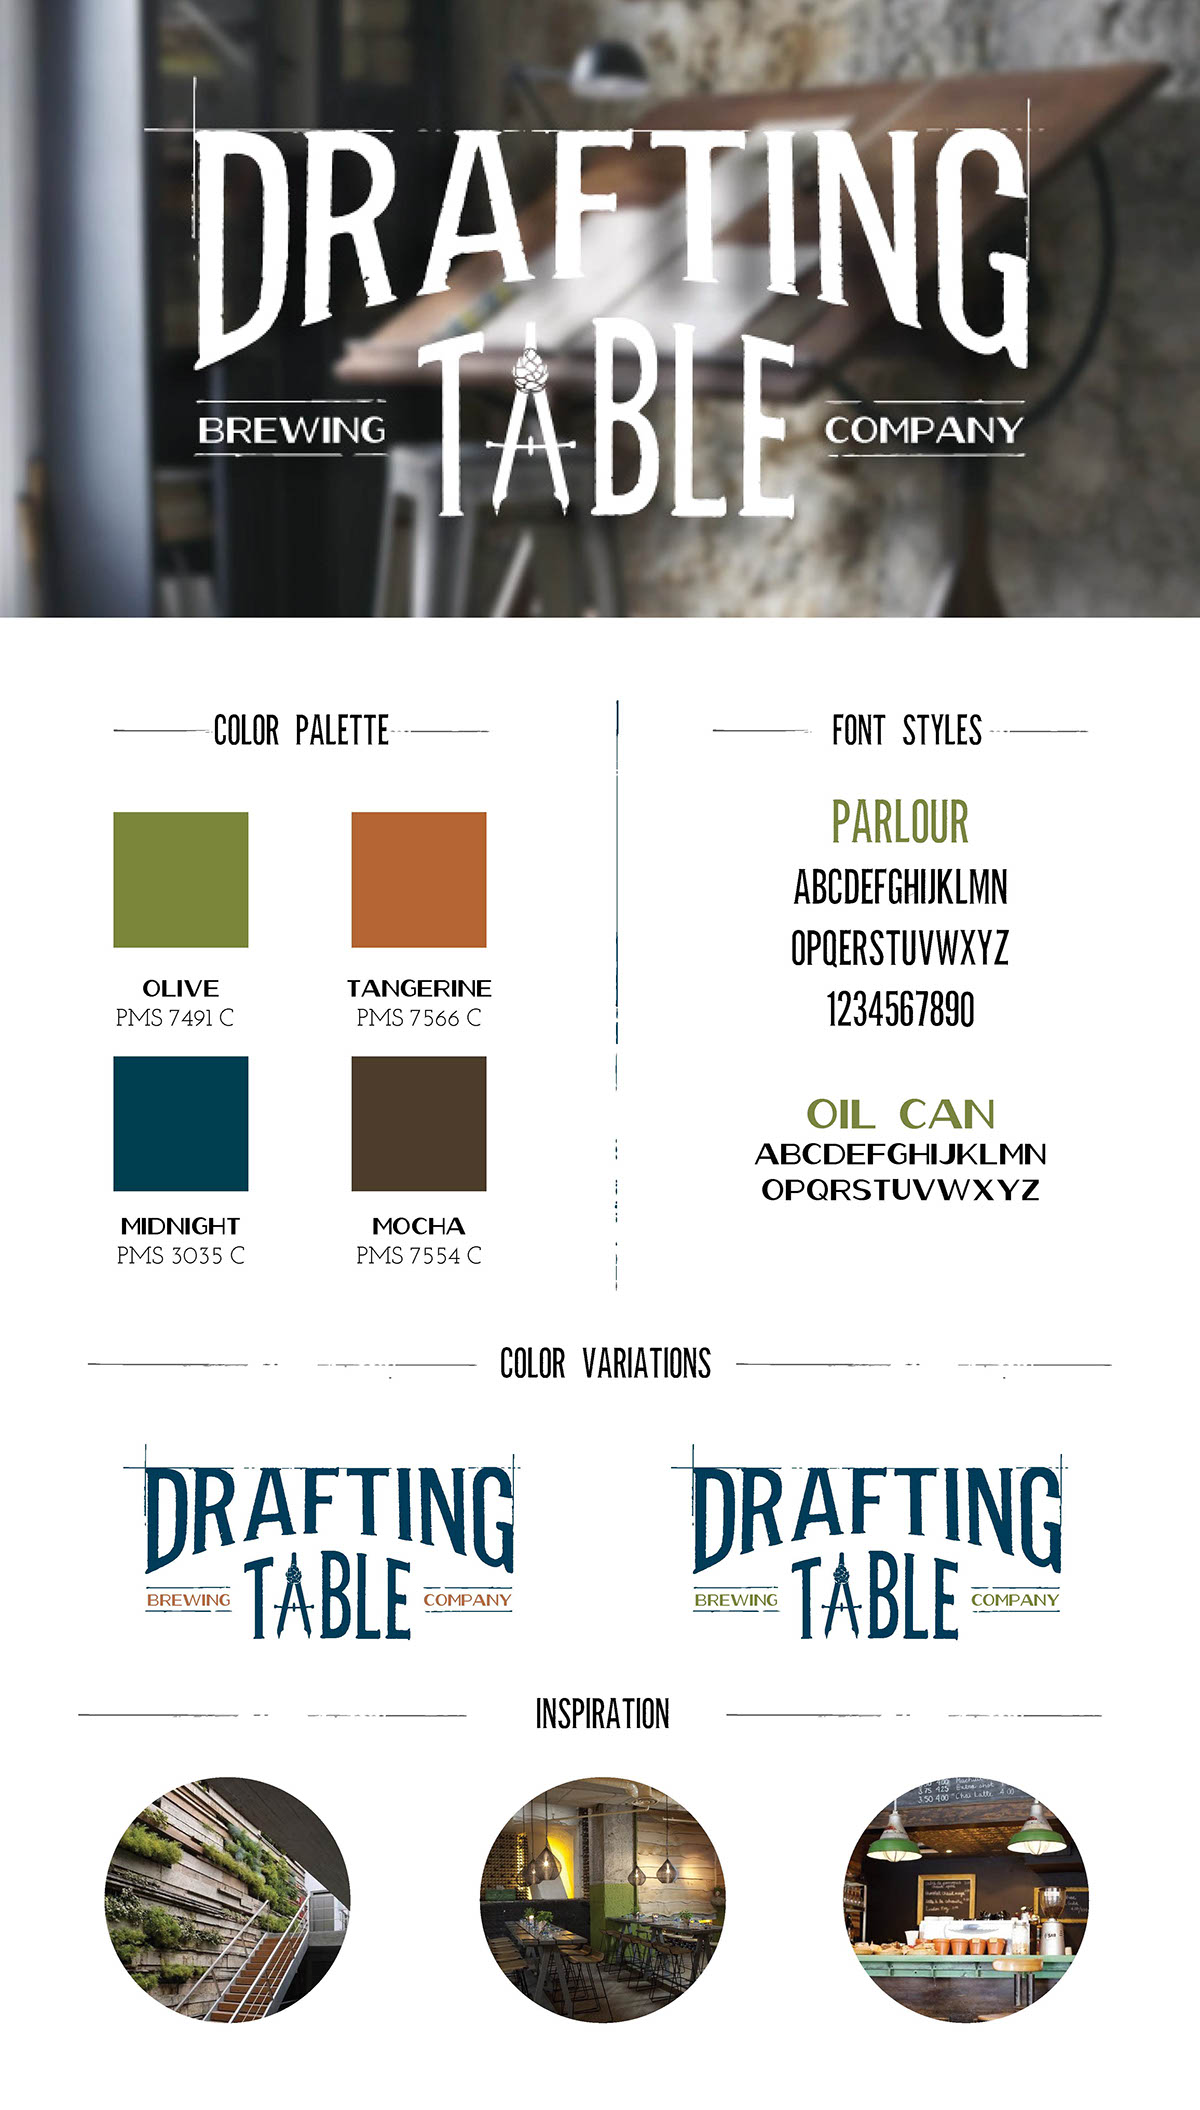 Logo Design brewery michigan craft beer Small Business Drafting Table